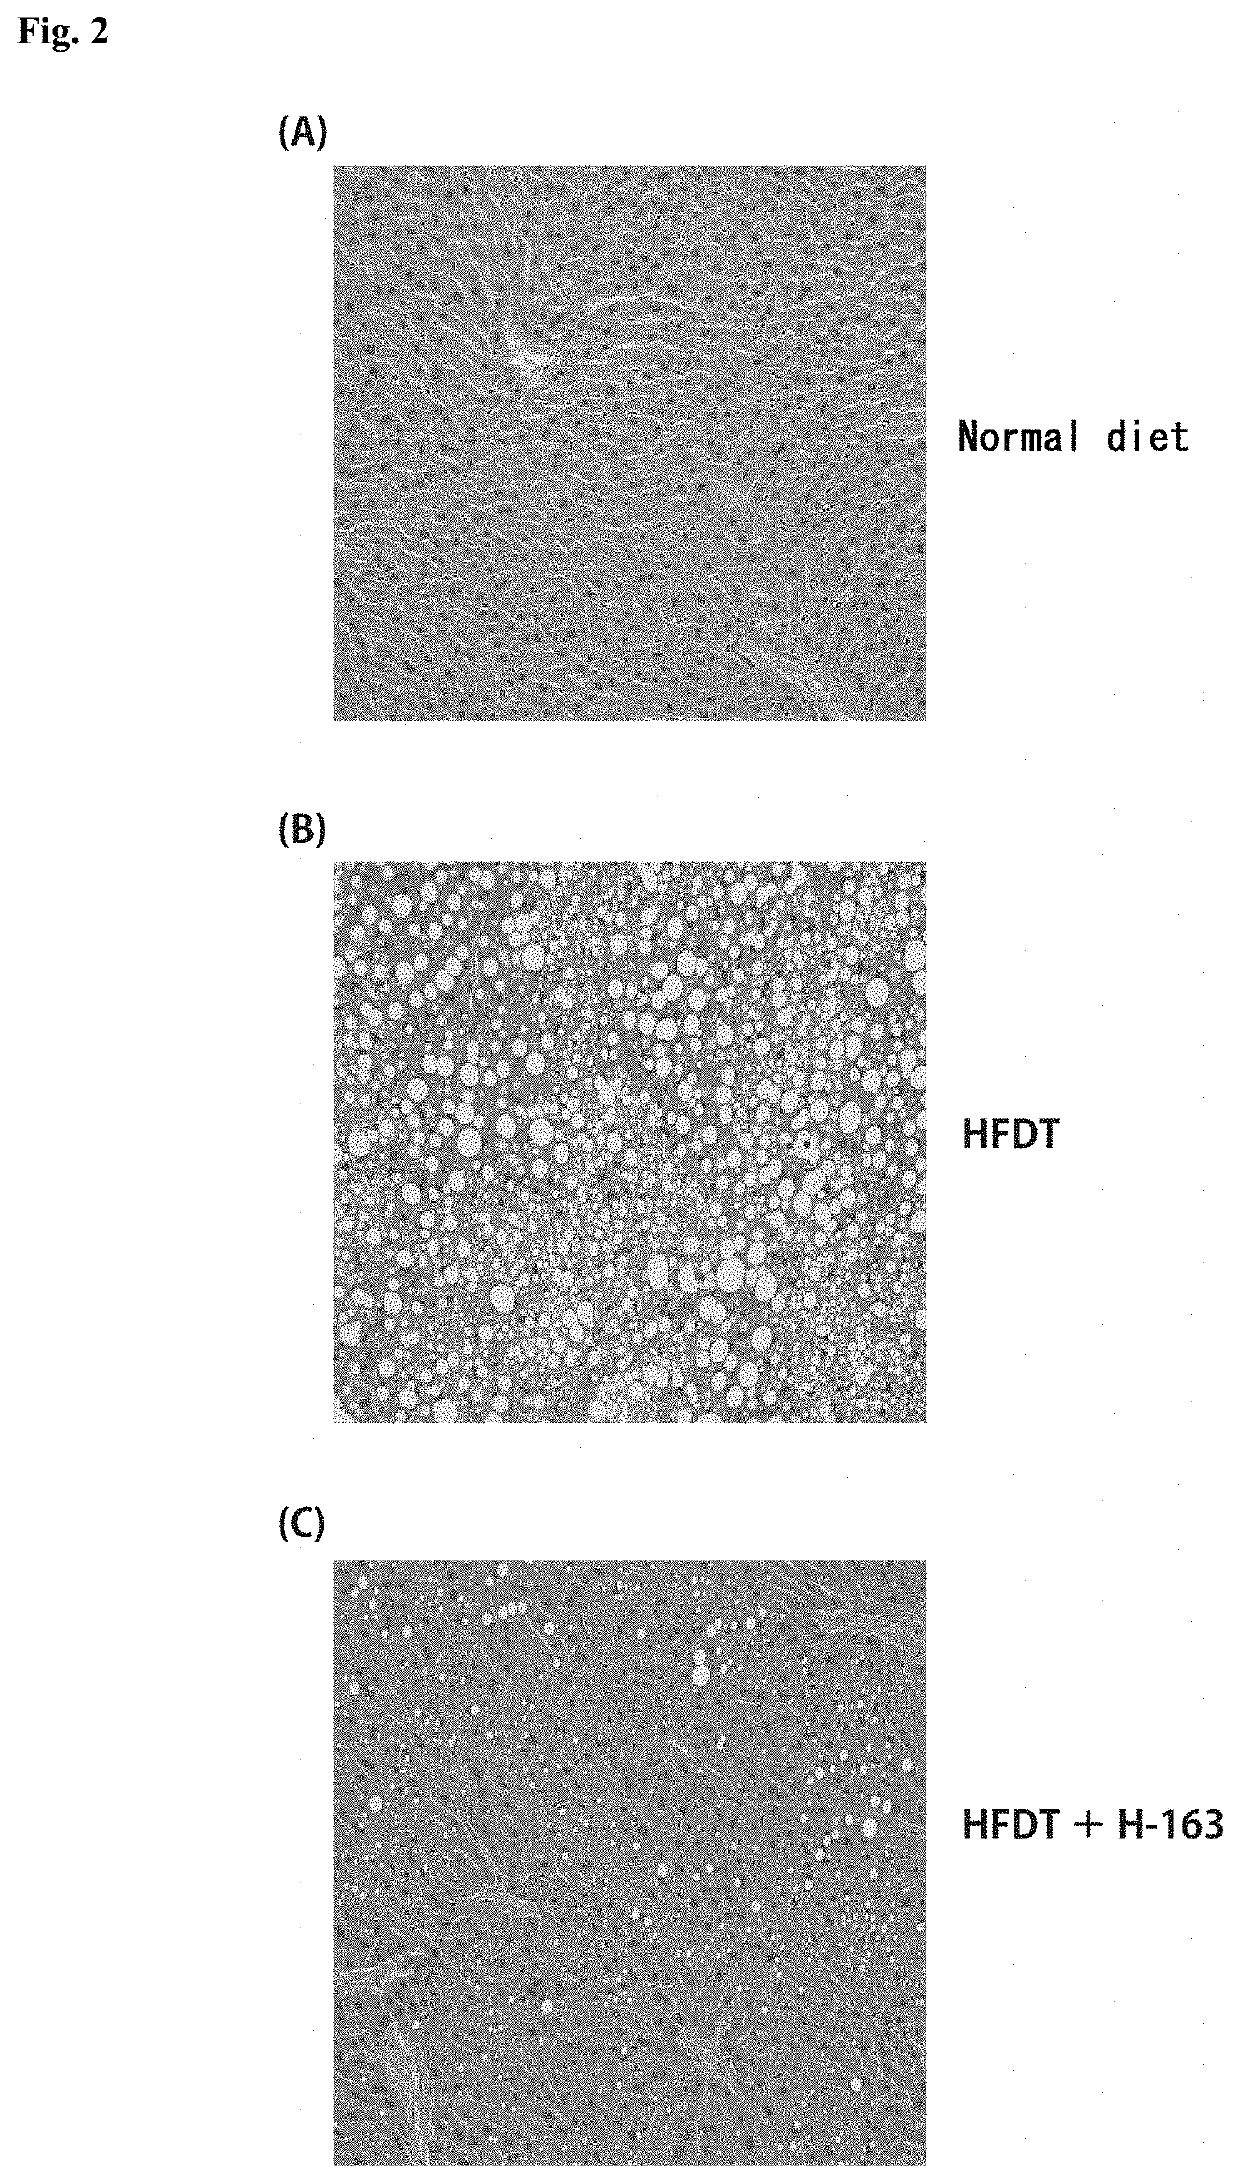 Therapeutic Agent for Fatty Liver Diseases and Therapeutic Agent for Adiposity